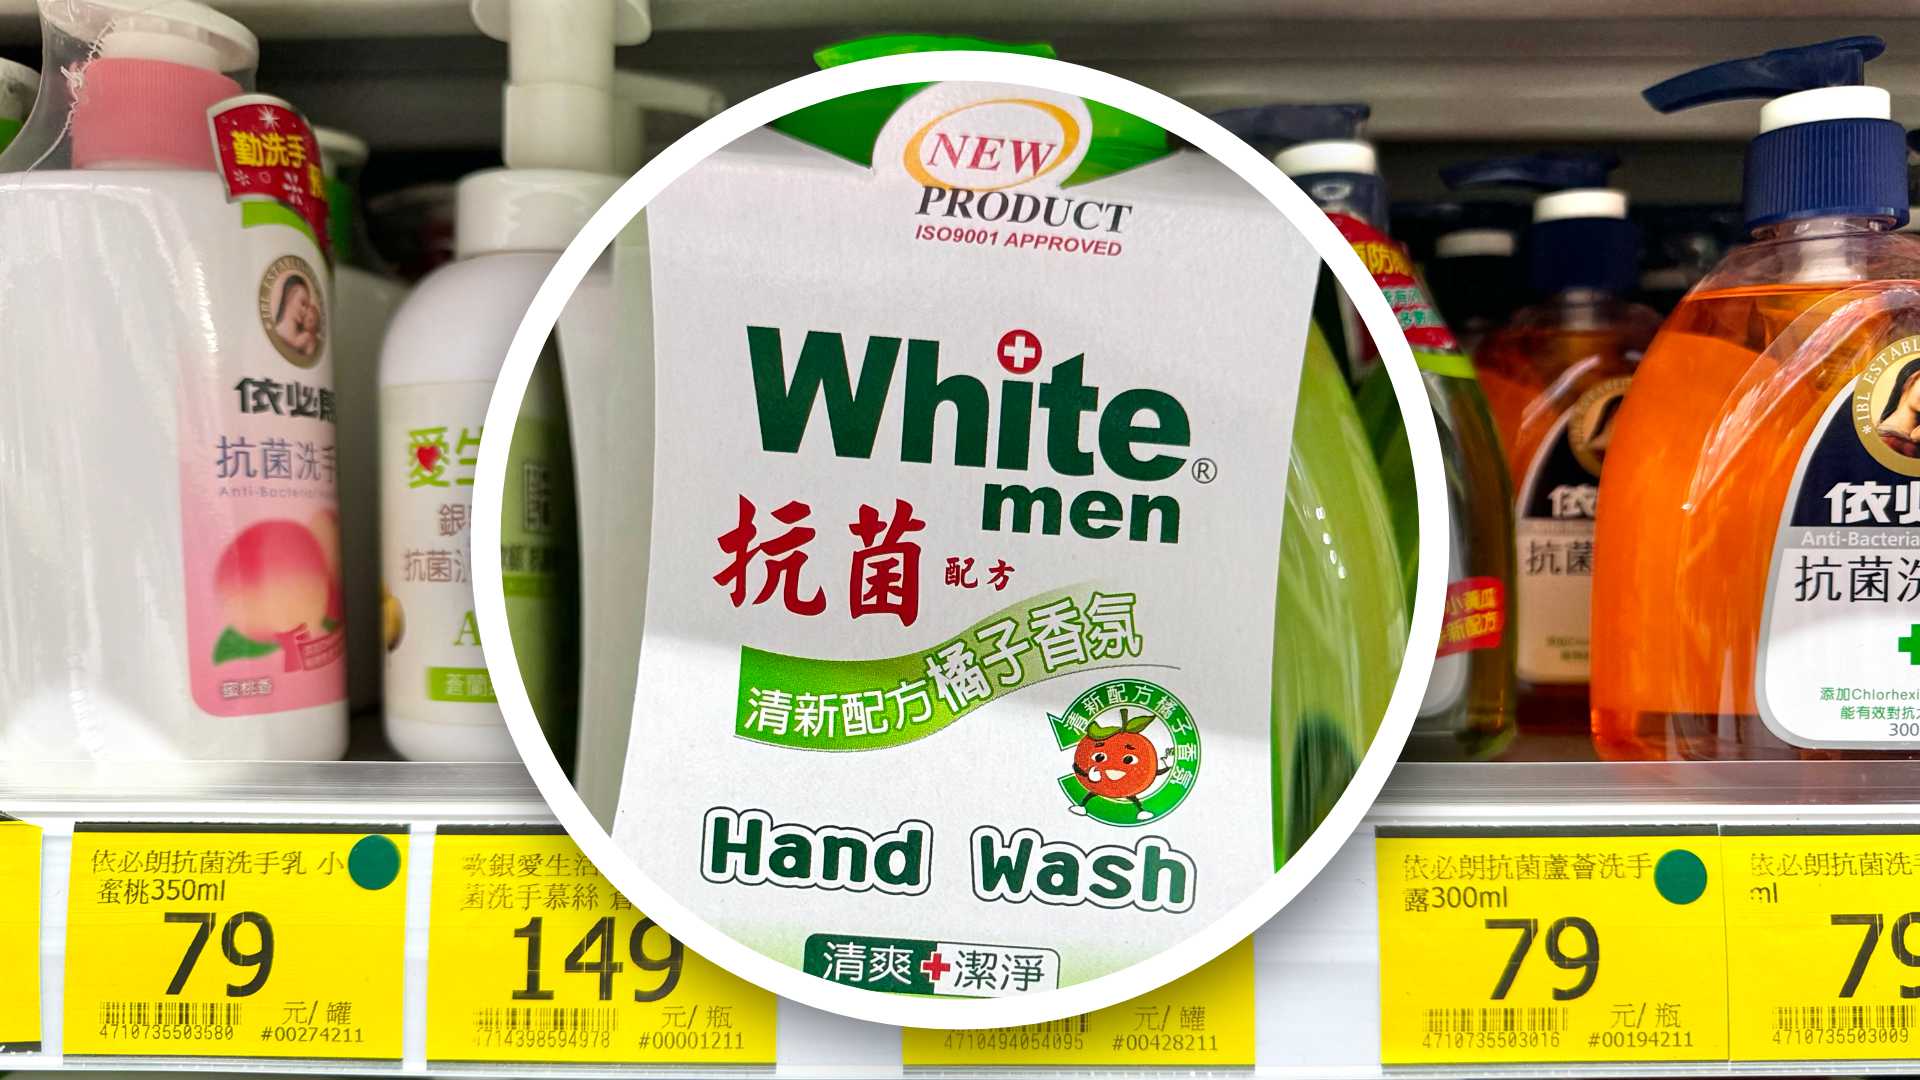 Close-up on the label of White men Hand Wash.